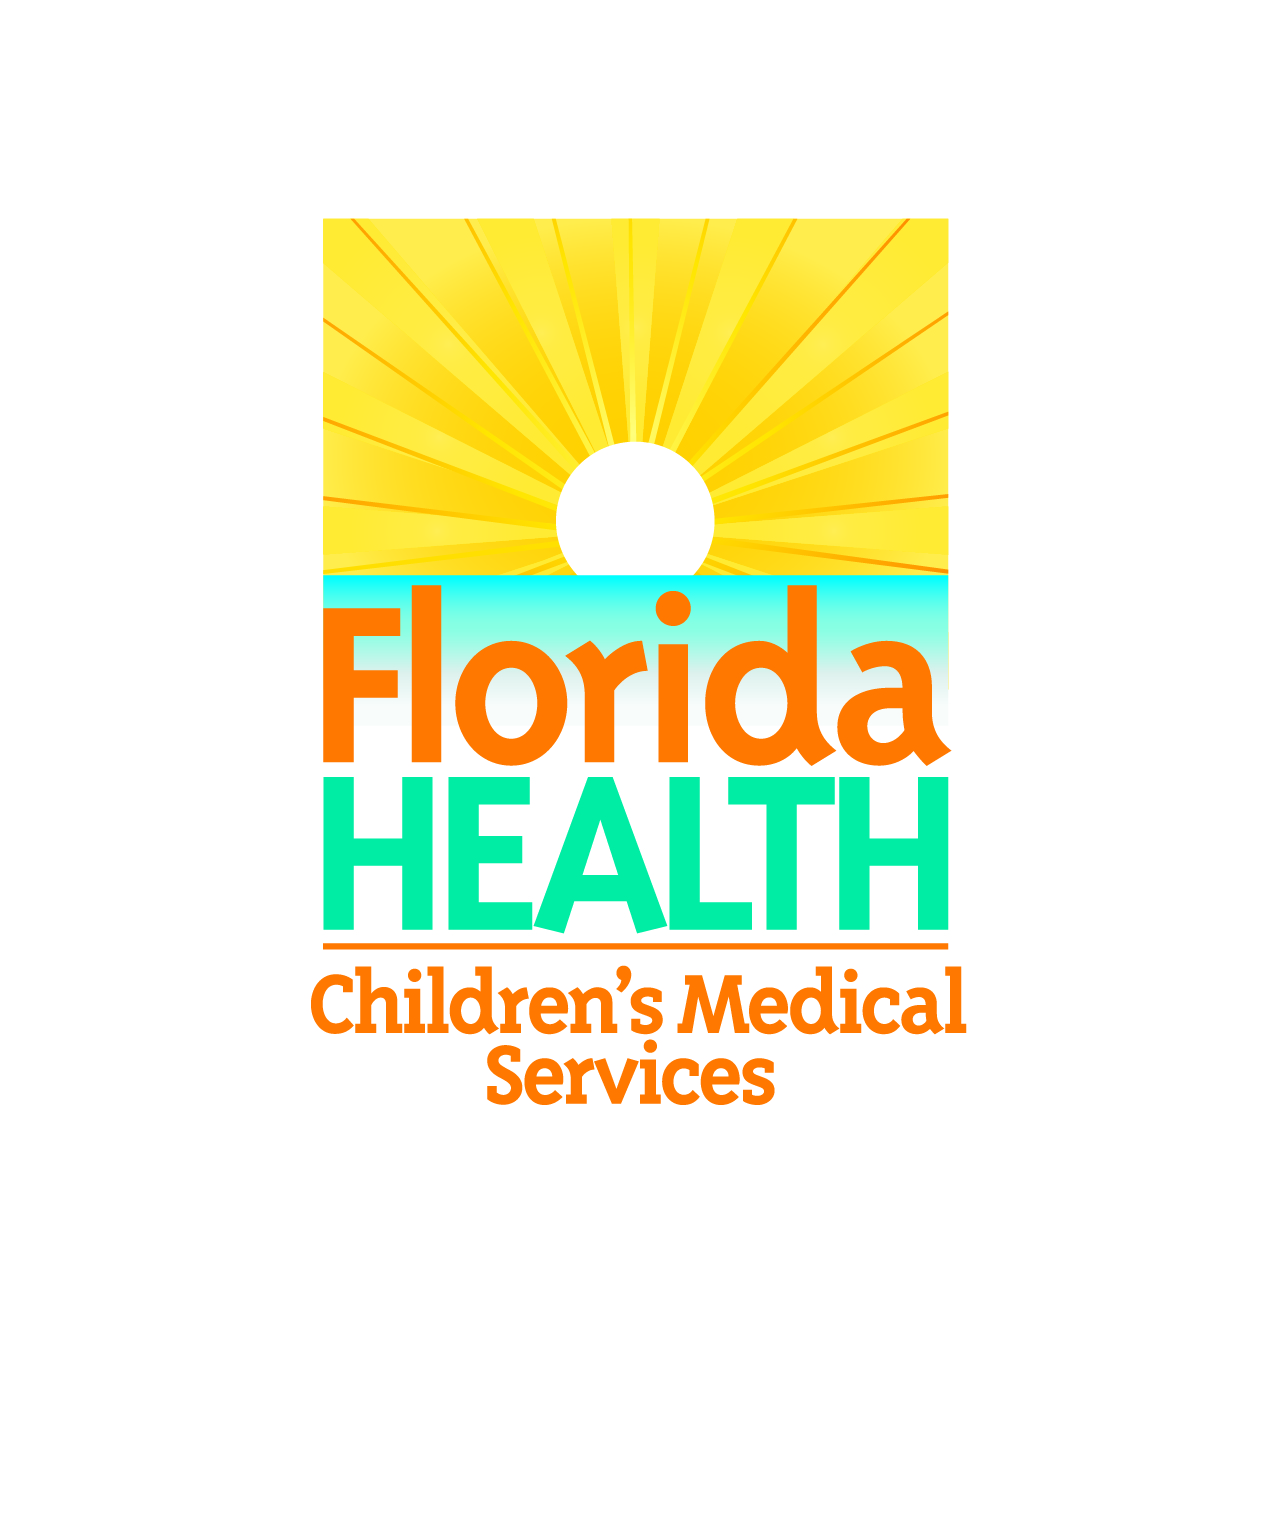 Division of Children’s Medical Services CMS logos